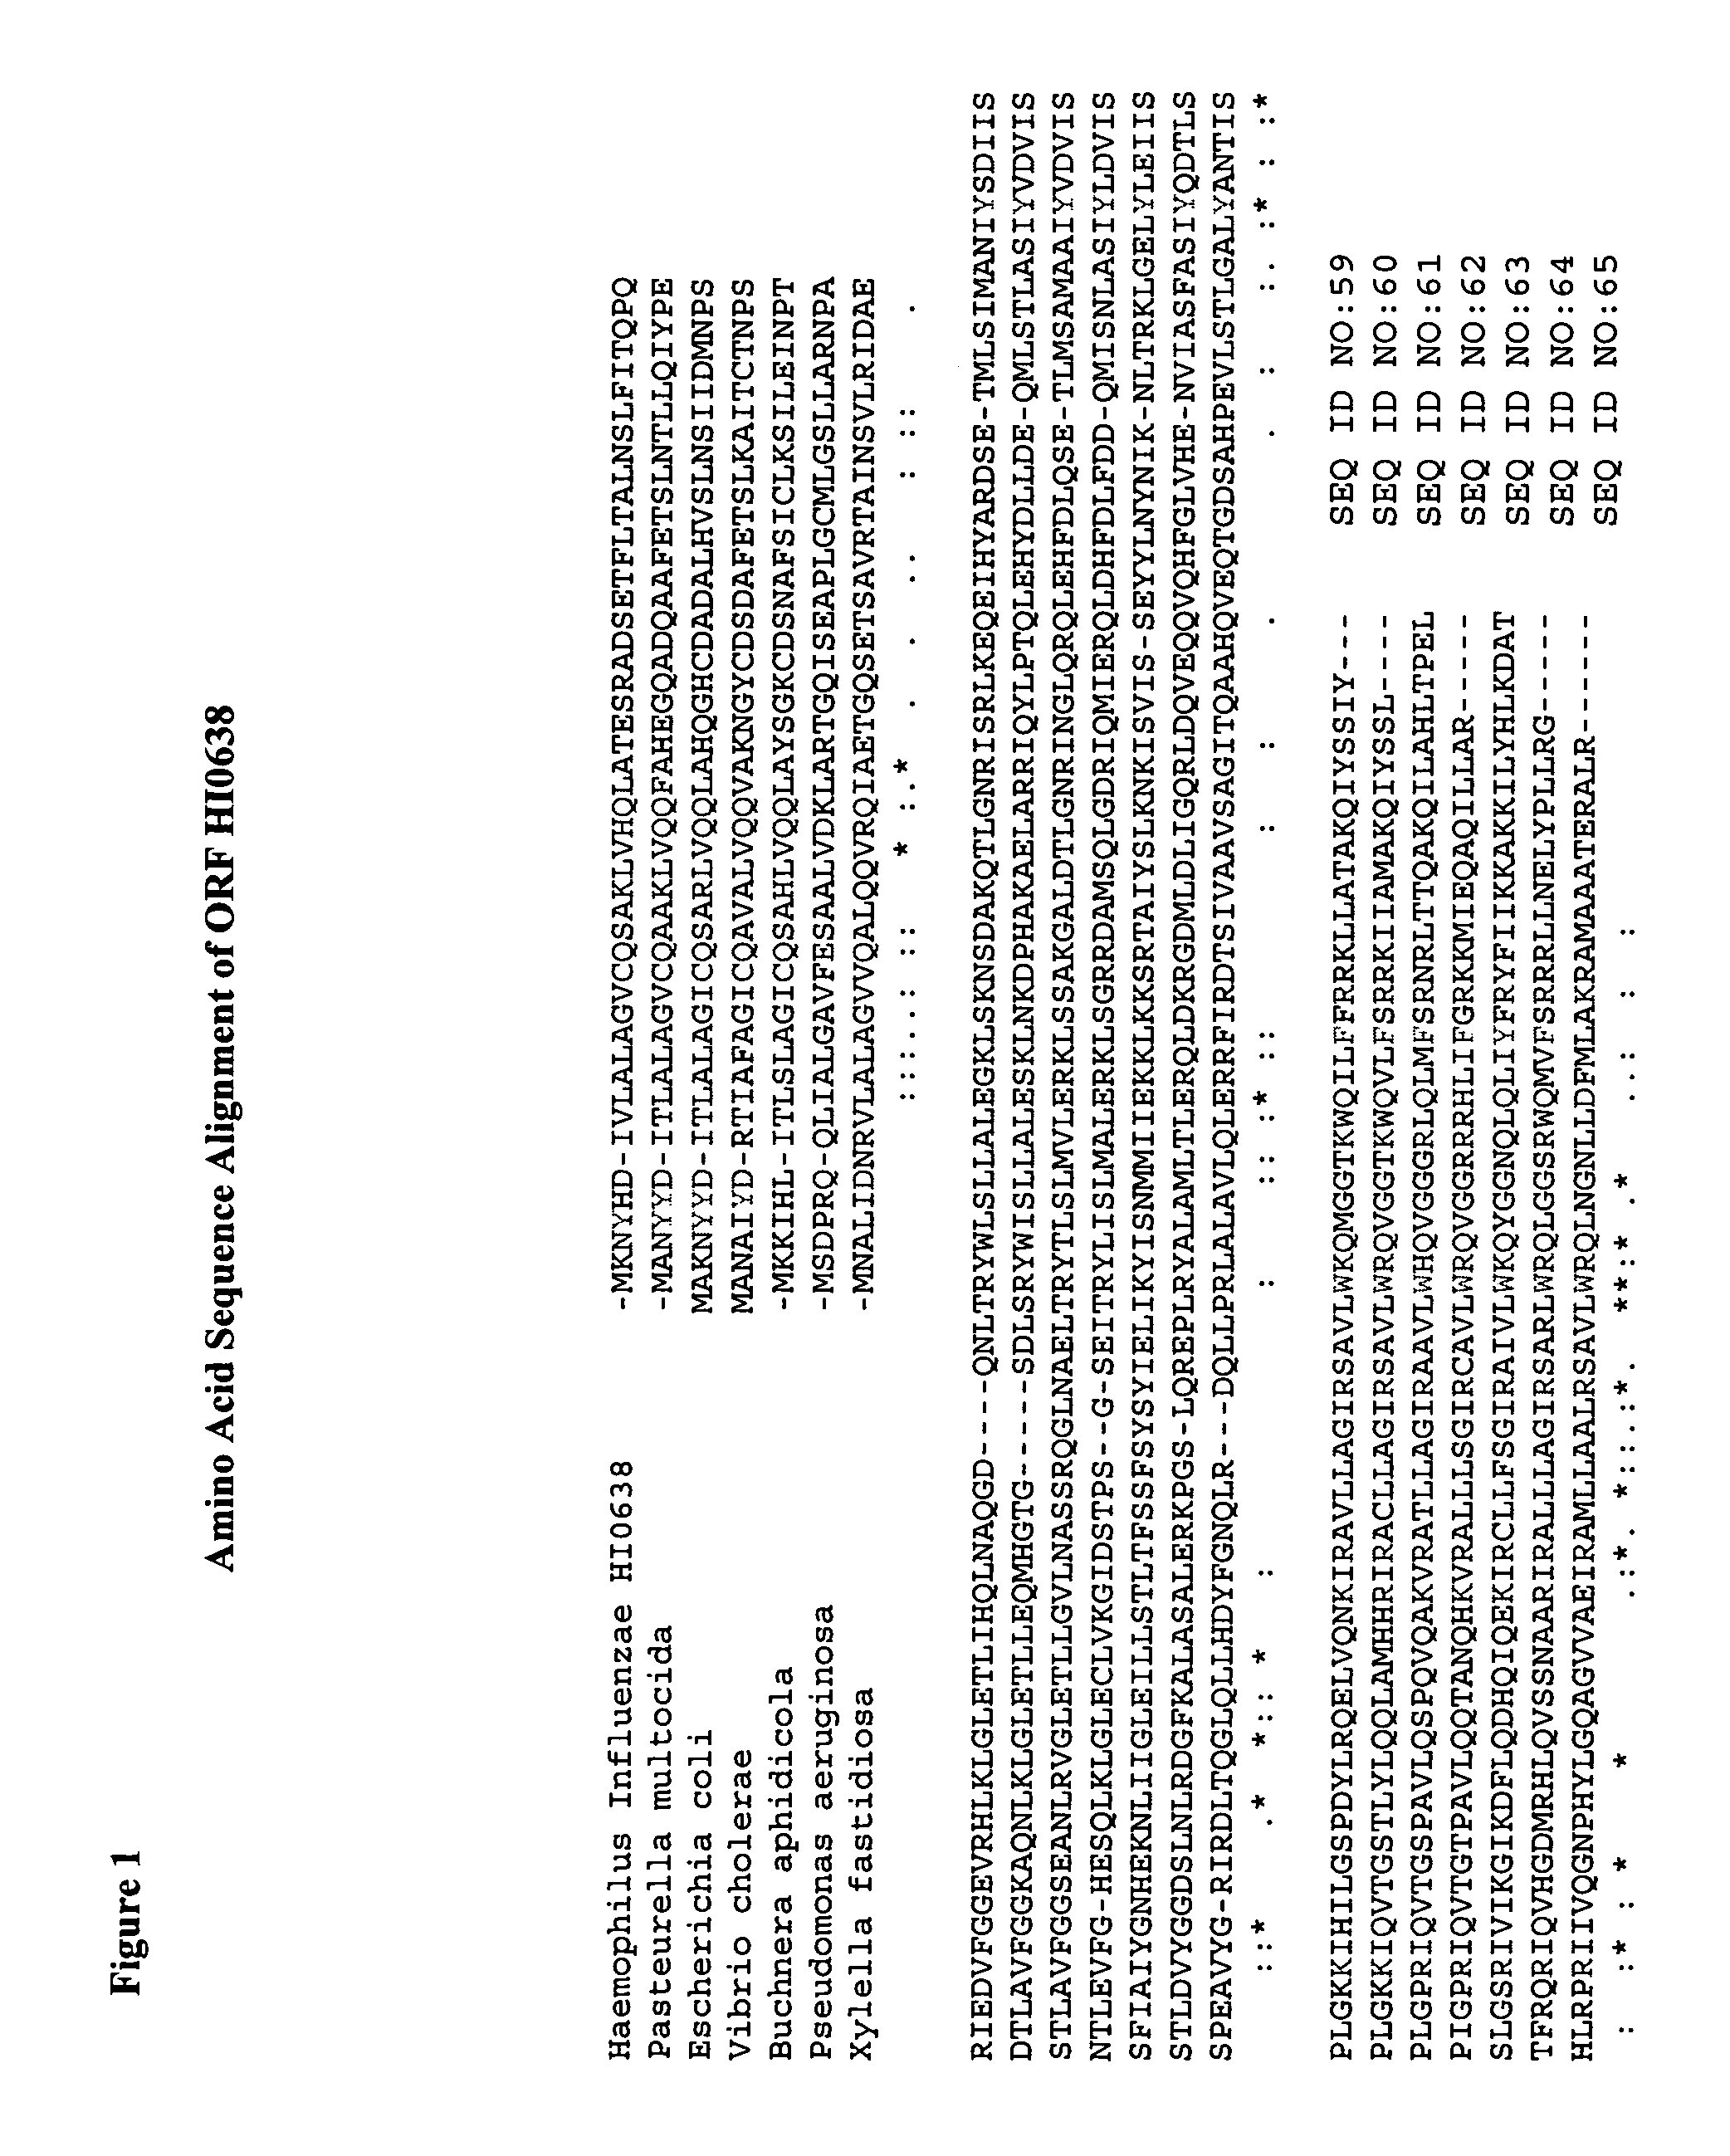 Amino acid sequences capable of facilitating penetration across a biological barrier